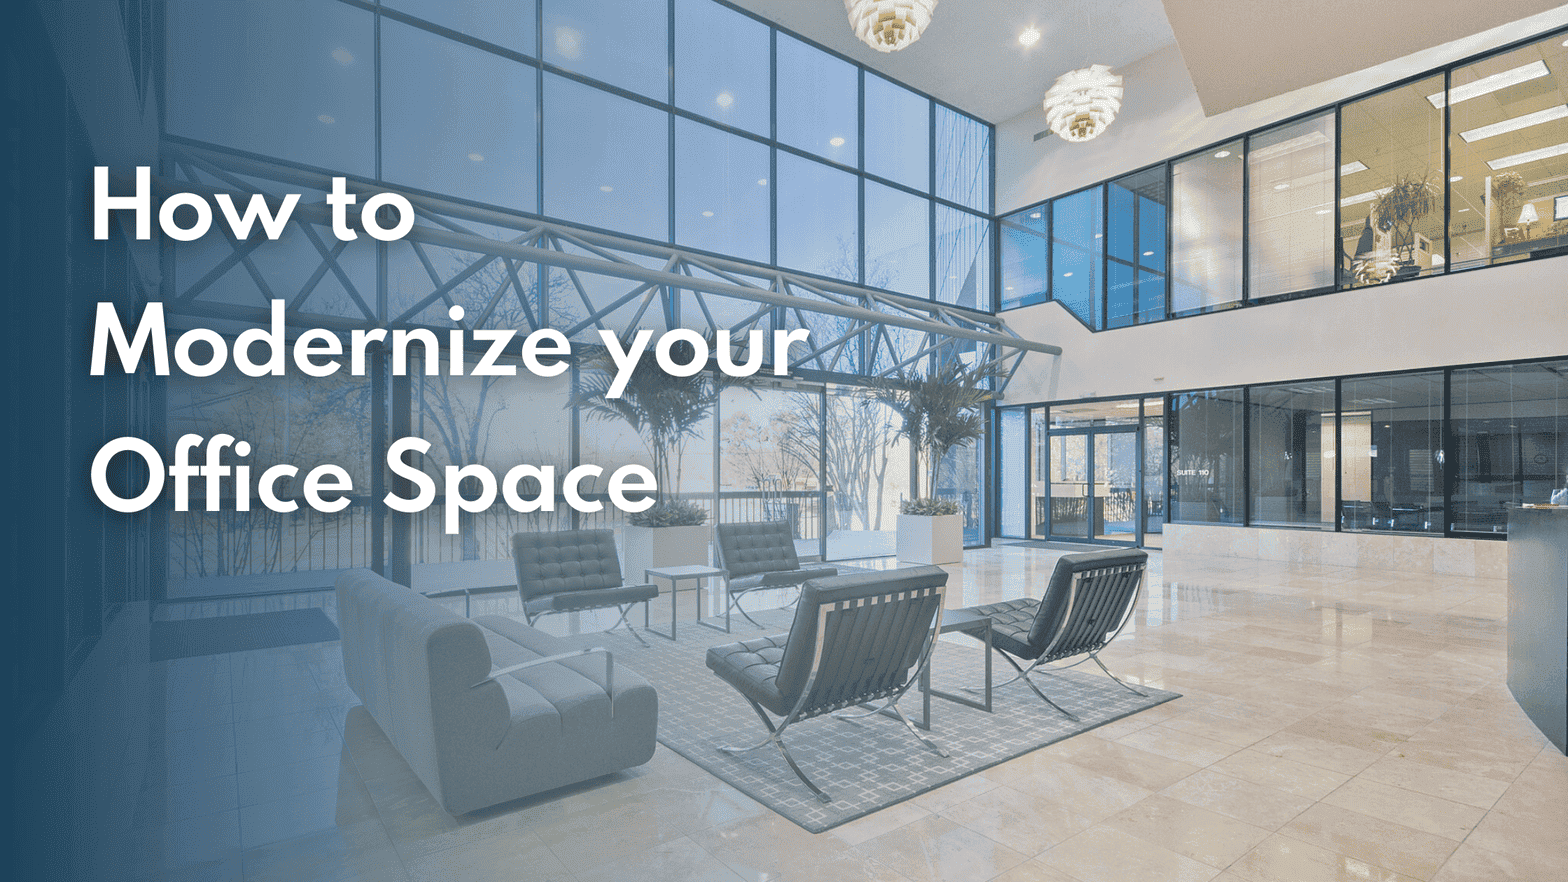 How to Modernize Office Space: 20+ Tips to Modernize Your Workspace